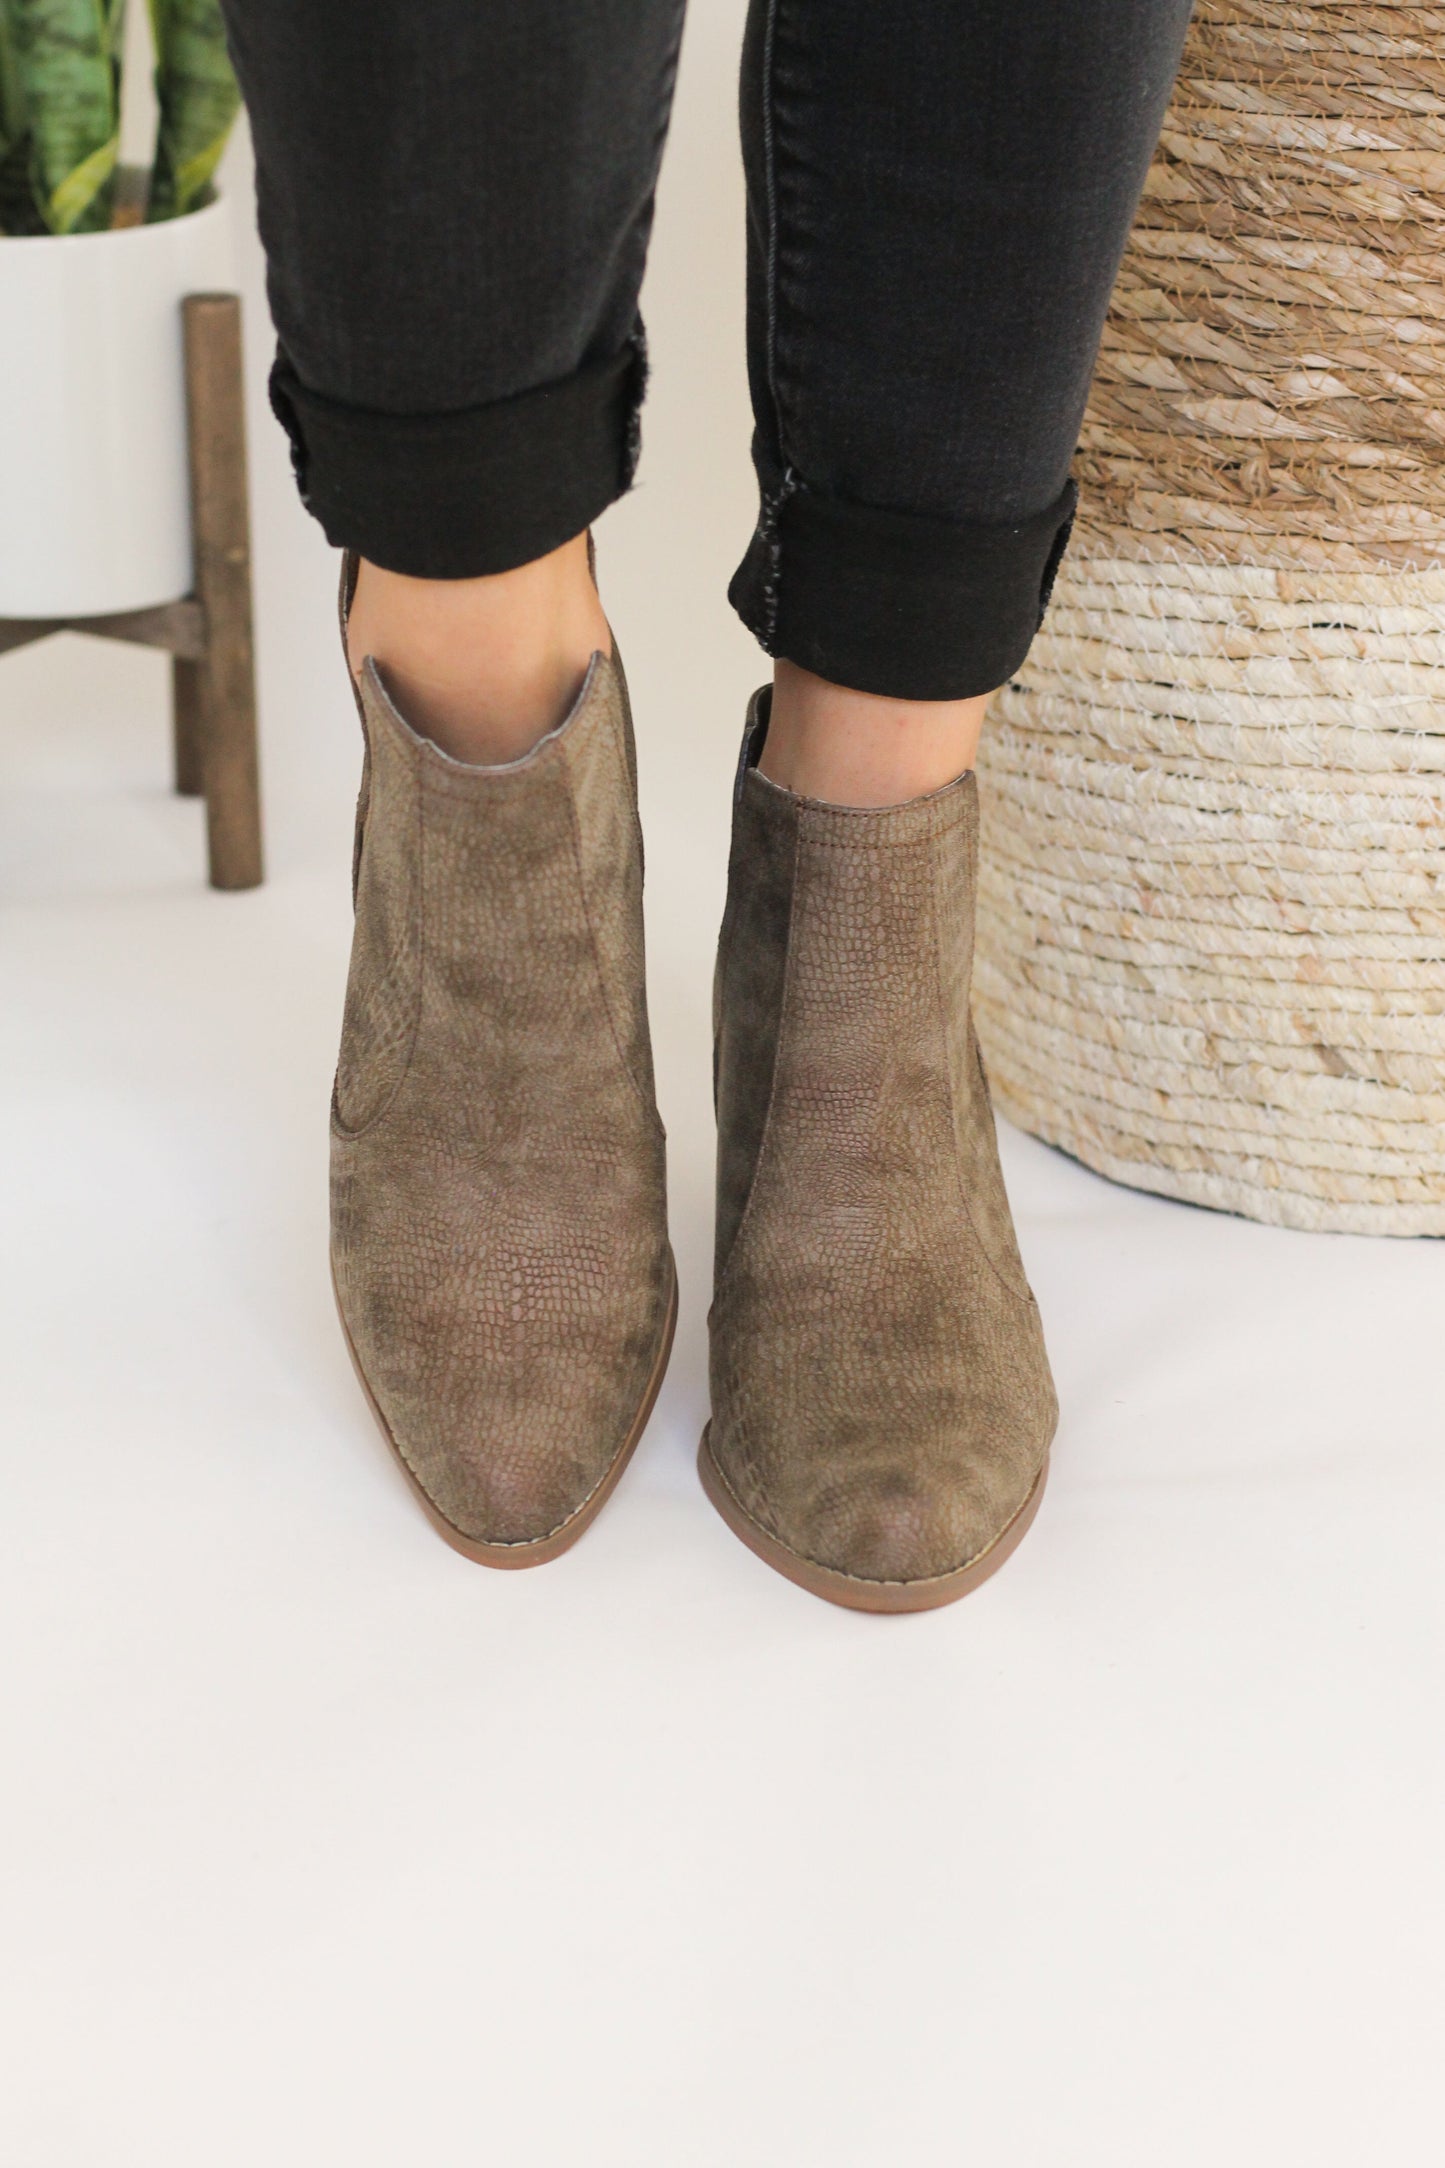 Not Rated Shea Bootie in Tan - Our Little Secret Boutique